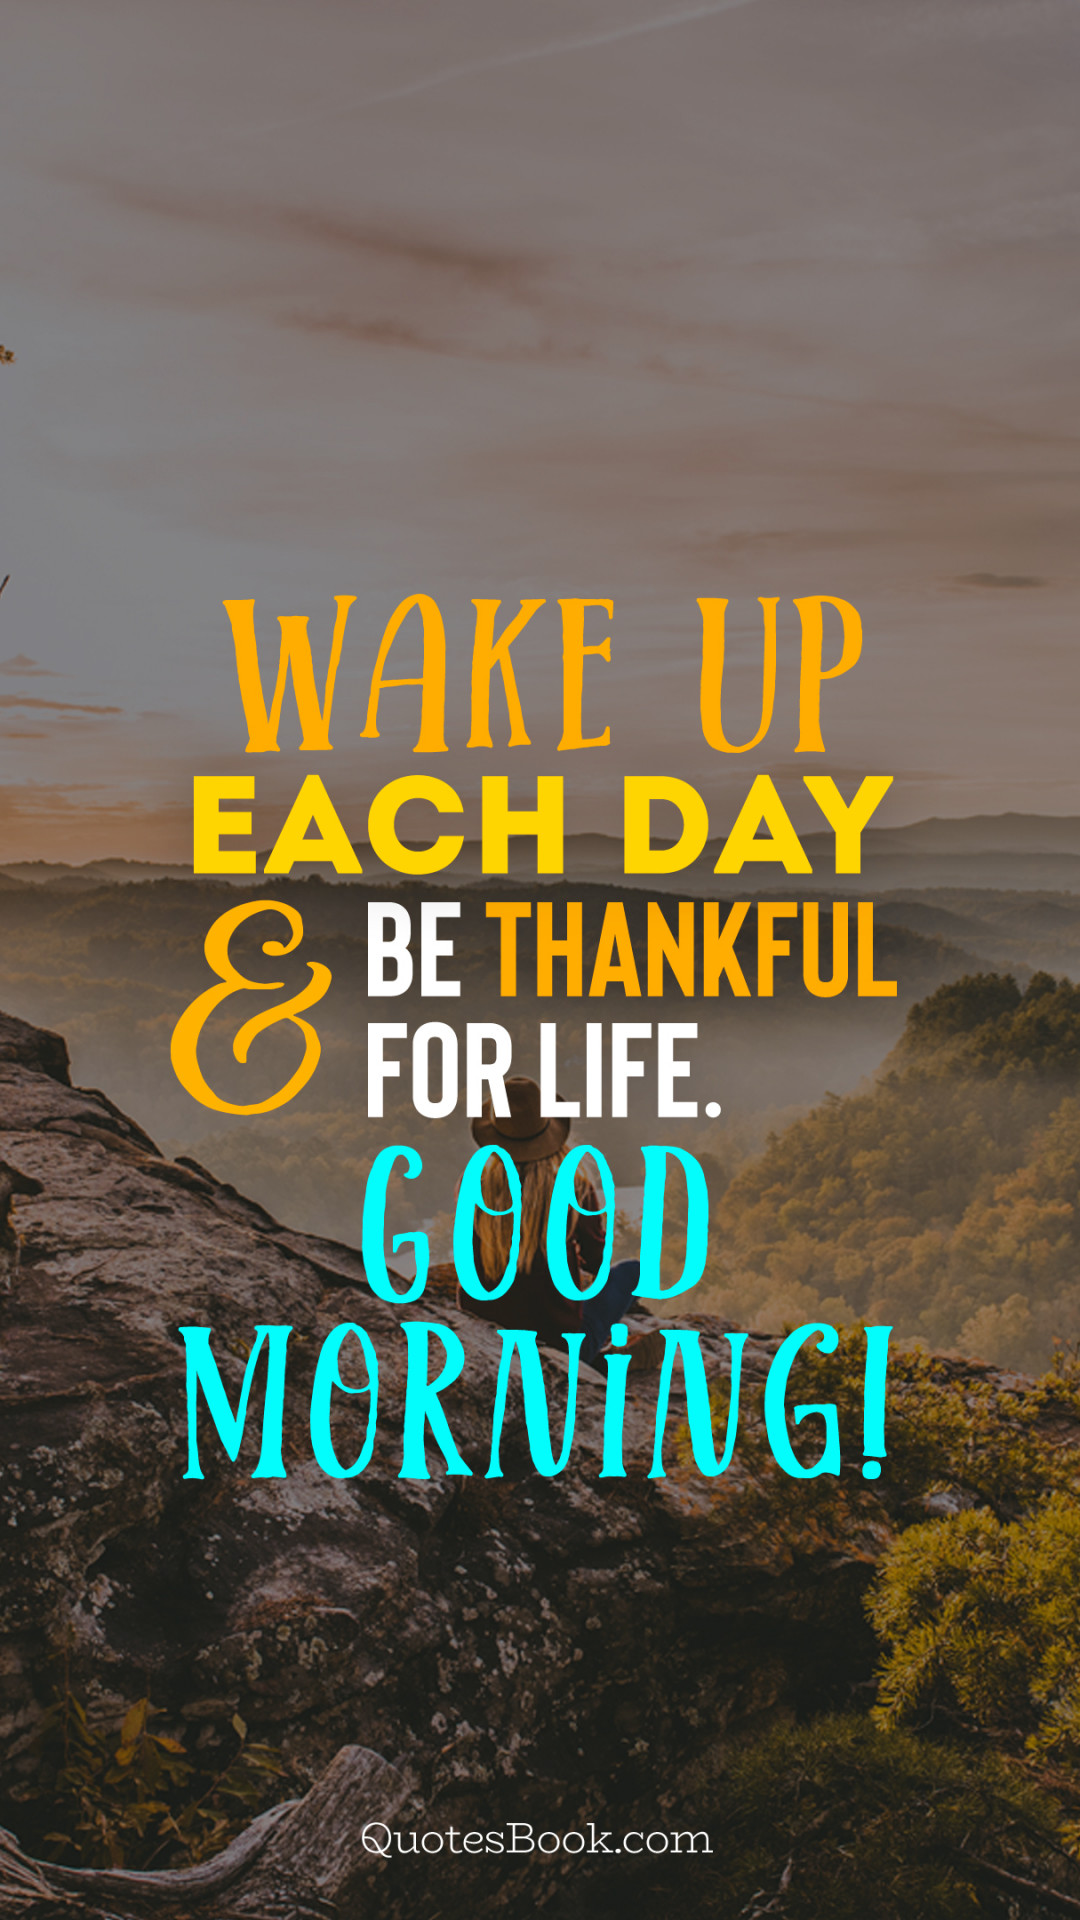 Wake up each day and be thankful for life. Good morning! - QuotesBook